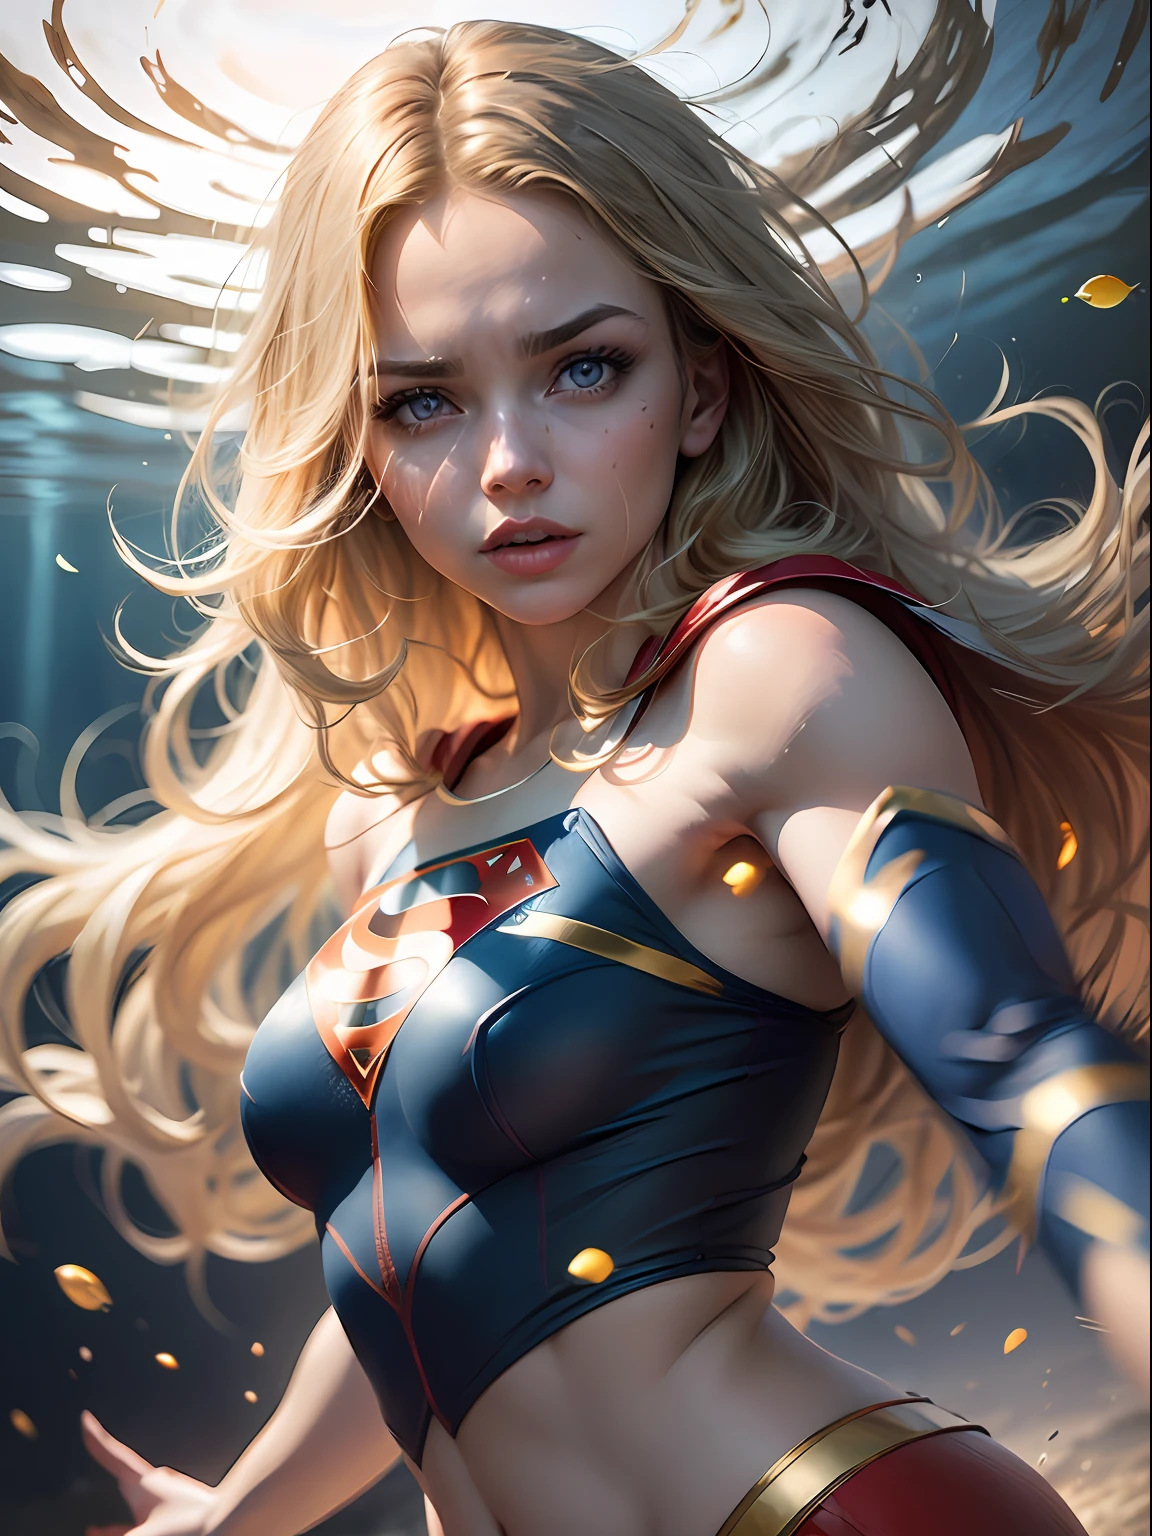 Supergirl, blue colored eyes, blonde hair, long  hair, (blonde girl:1.5), inside a lake, night baths, (Realistic:1.2), Partially underwater shooting, (真实感:1.2), (master part:1.2), (best quality), (ultra detaild), (8K, intrikate), (85 millimeters), light particles, The lighting, (highy detailed:1.2), (face detailed:1.5), (gradients), SFW, Colouring, (detailedeyes:1.5), (detailed backgrounds), (Dynamic angle:1.2), (dynamic pose:1.2), (rule of third_compositing:1.3), (action line:1.2), throwing long, night light, standing alone.